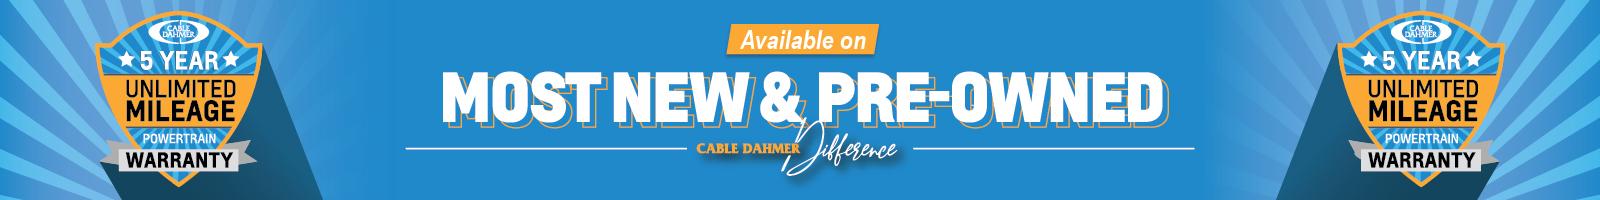 The Cable Dahmer 5-Year Unlimited Milage Warranty